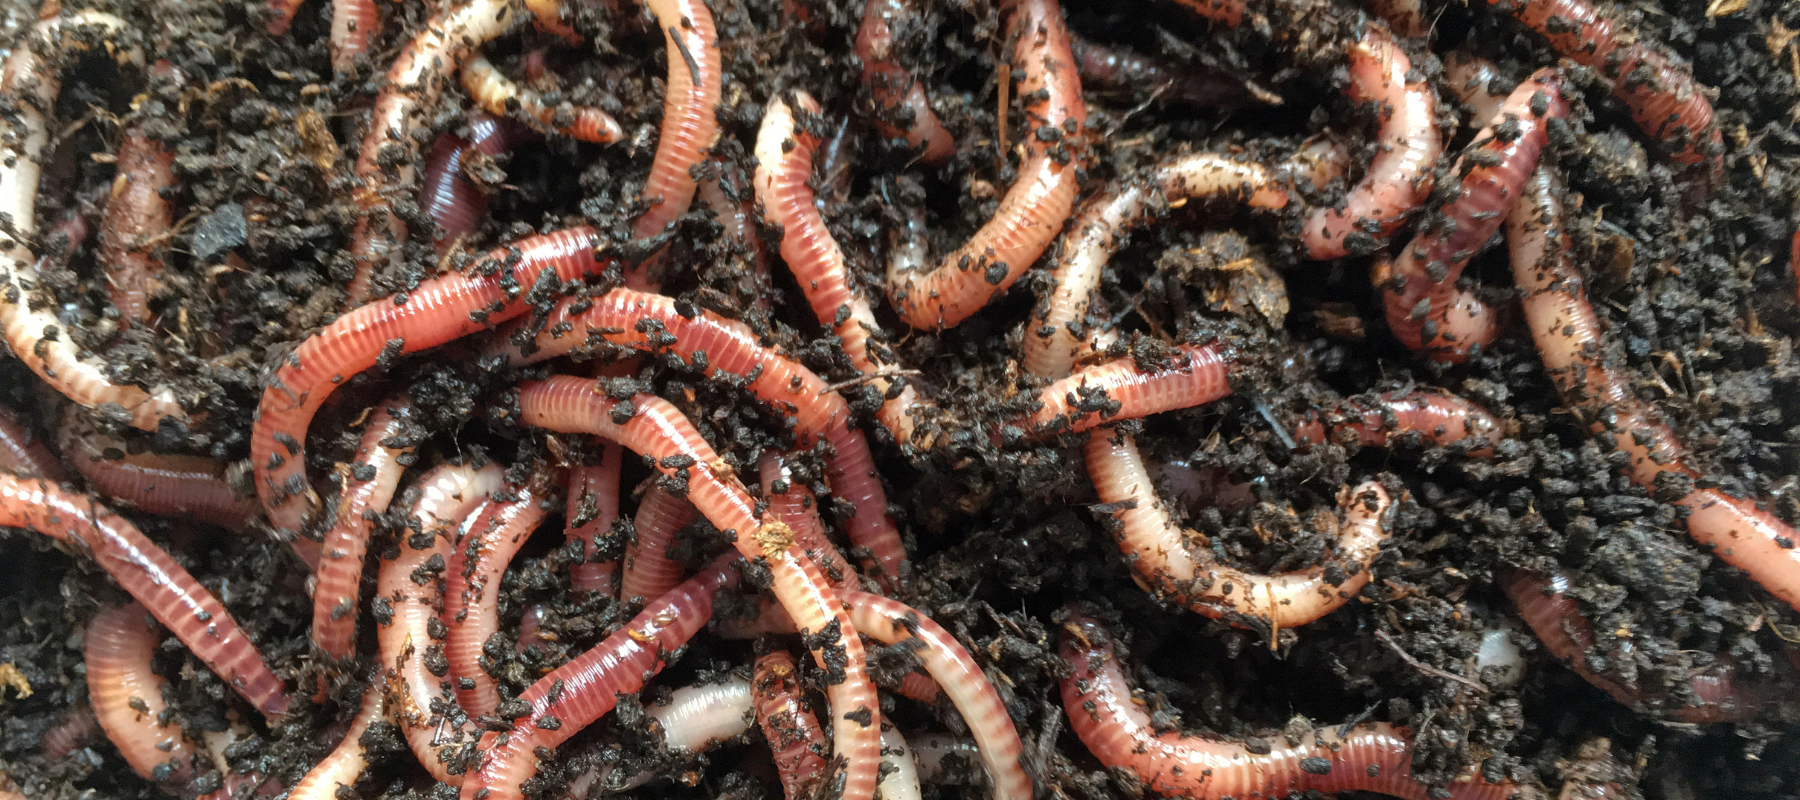 How to attract earthworms to your soil